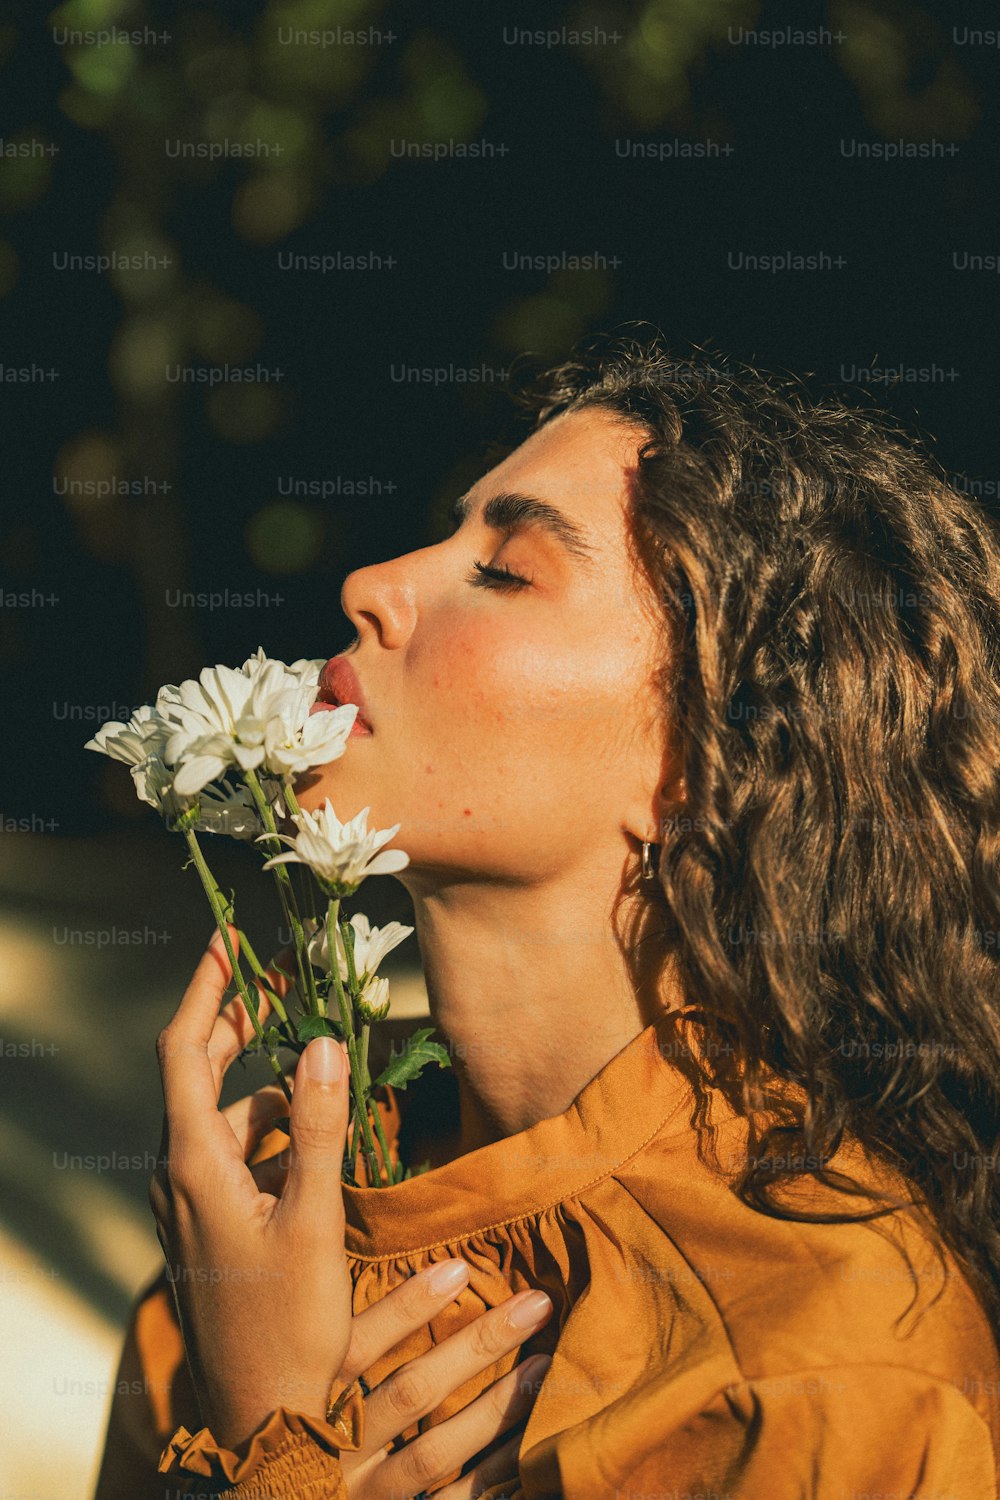 a woman smelling a bunch of white flowers